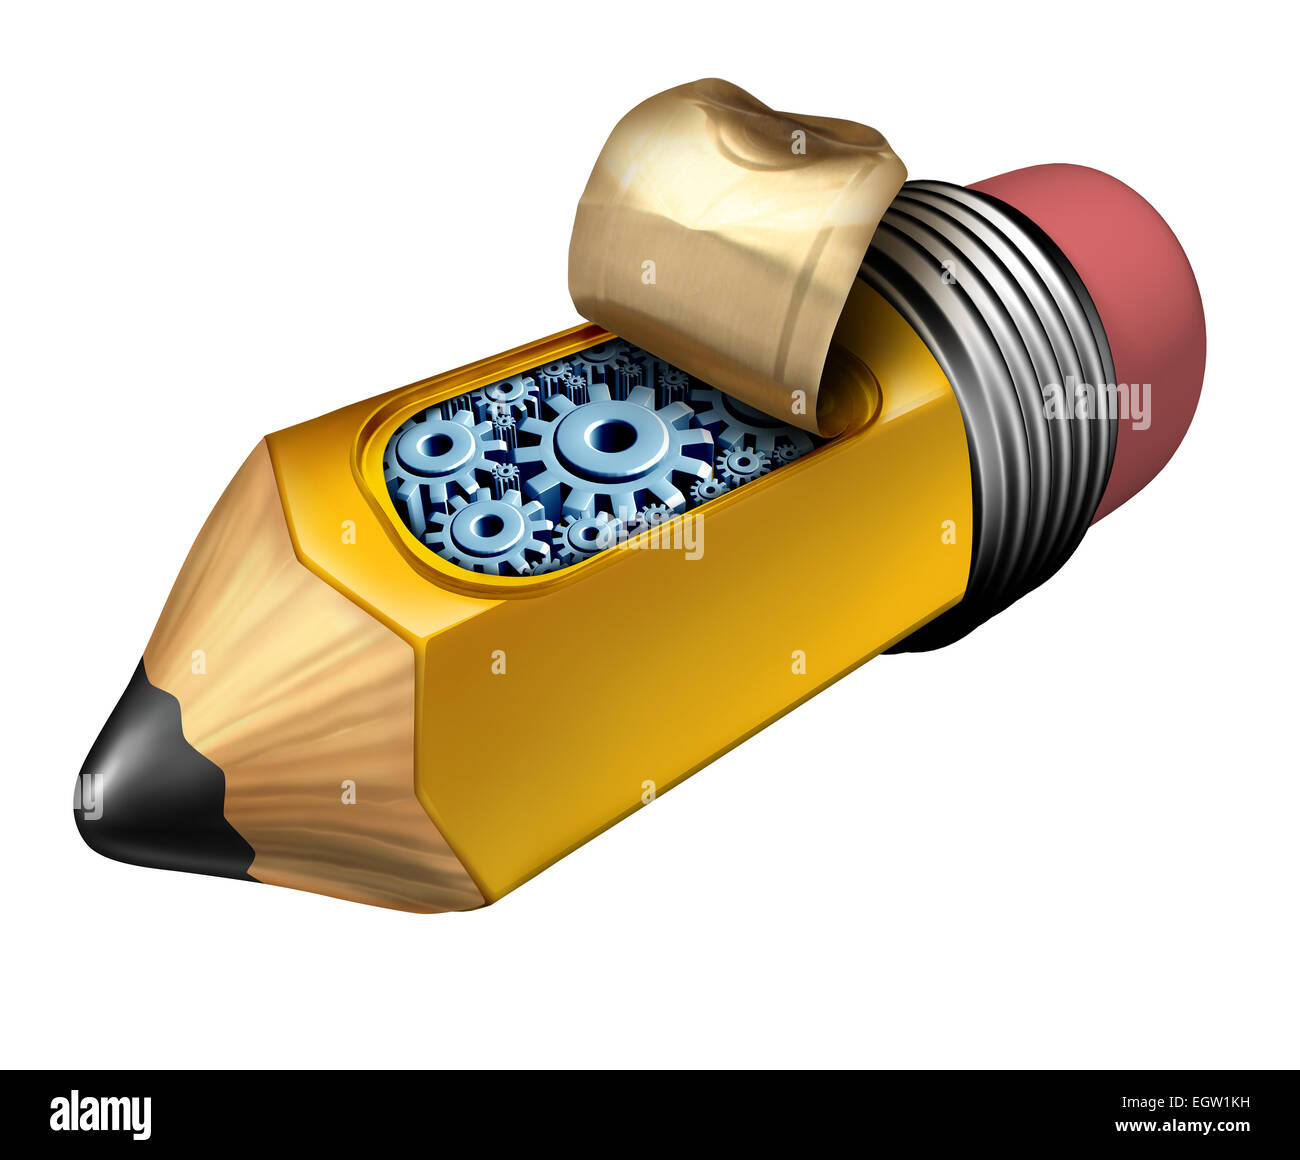 Inside creativity business innovation concept as a pencil with an opening revealing gears and cog wheels under the hood as a technology metaphor object. Stock Photo